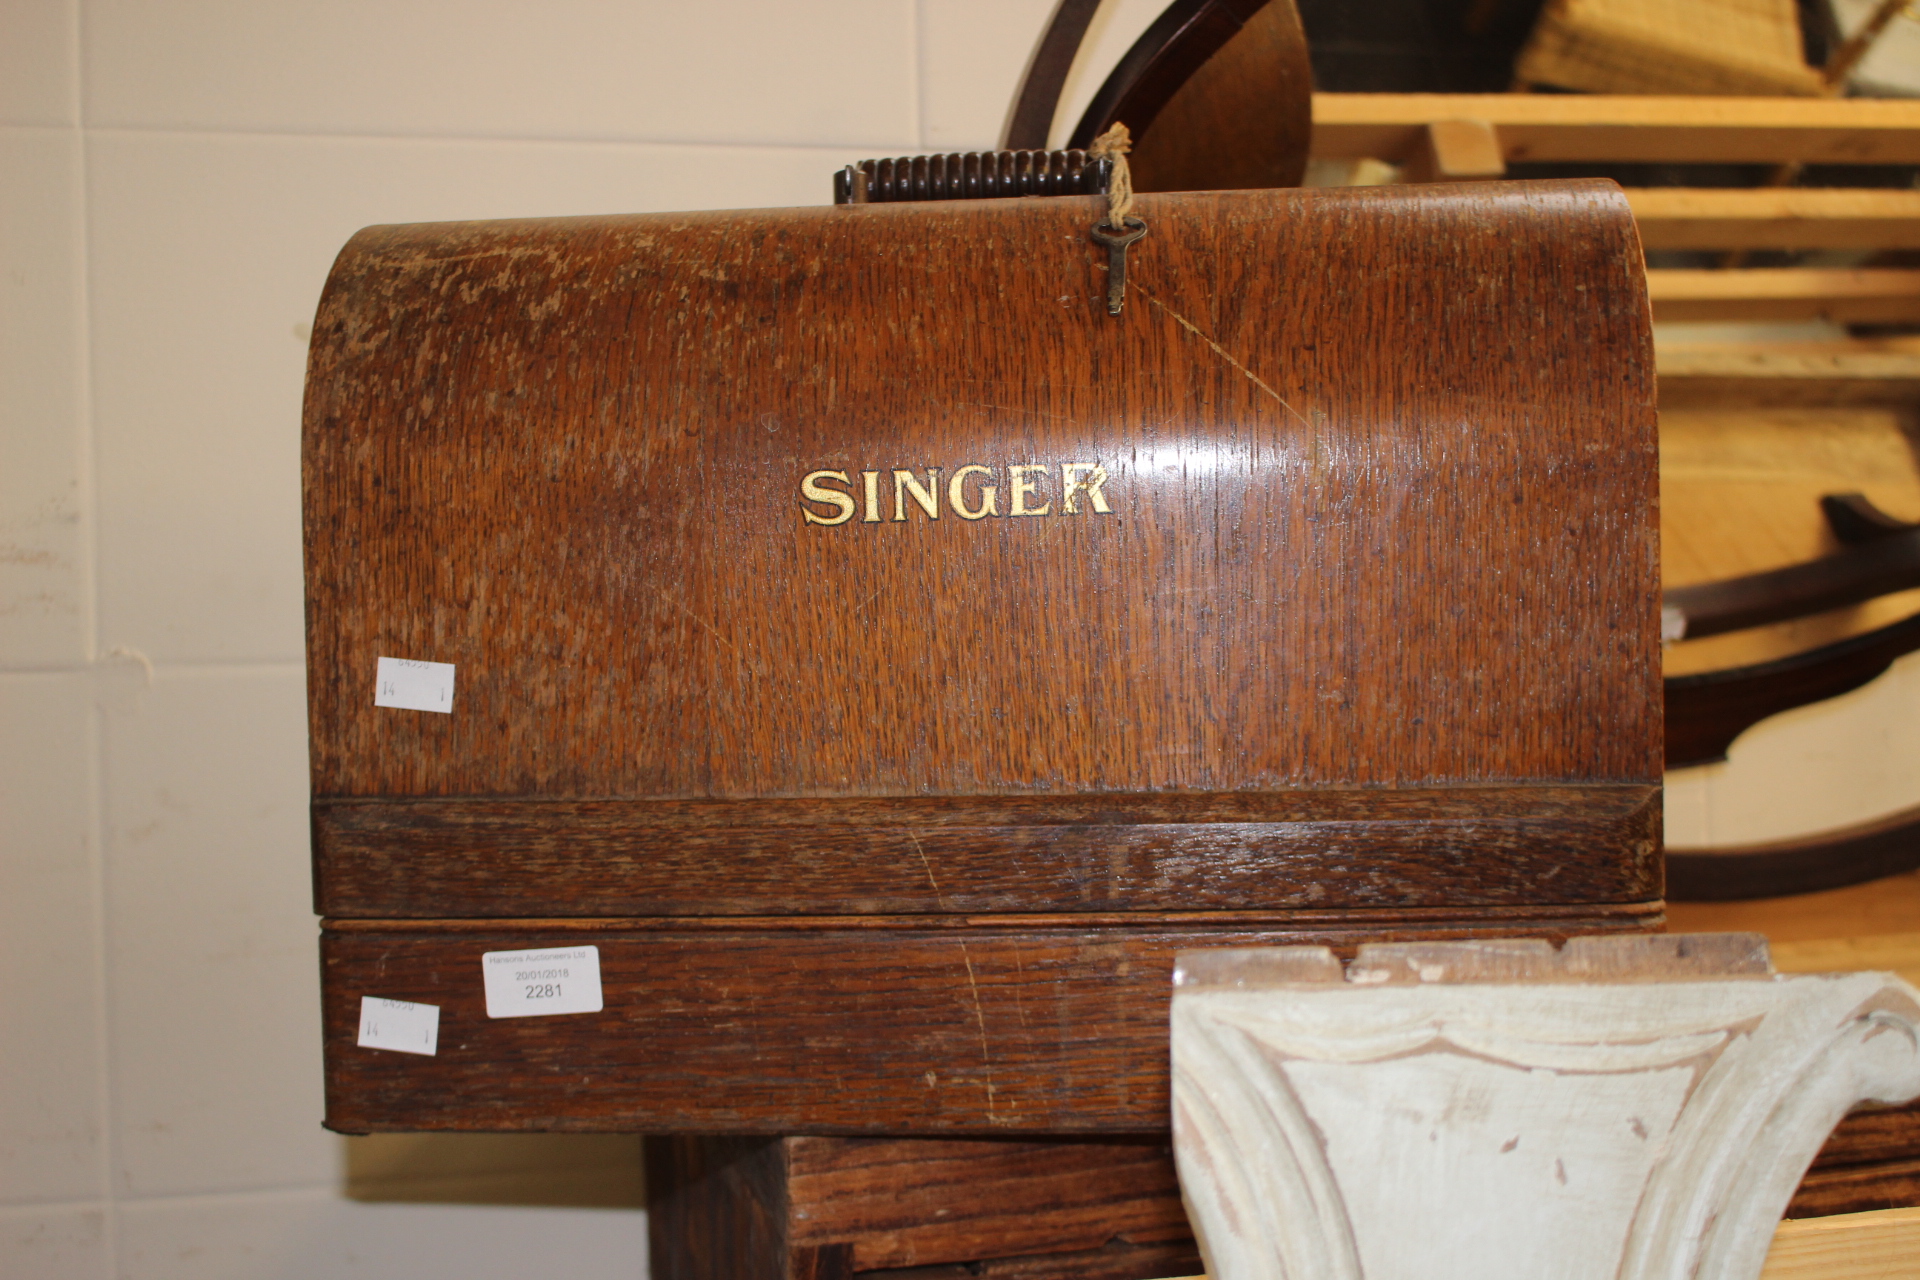 An early 20th Century oak cased Singer sewing machine